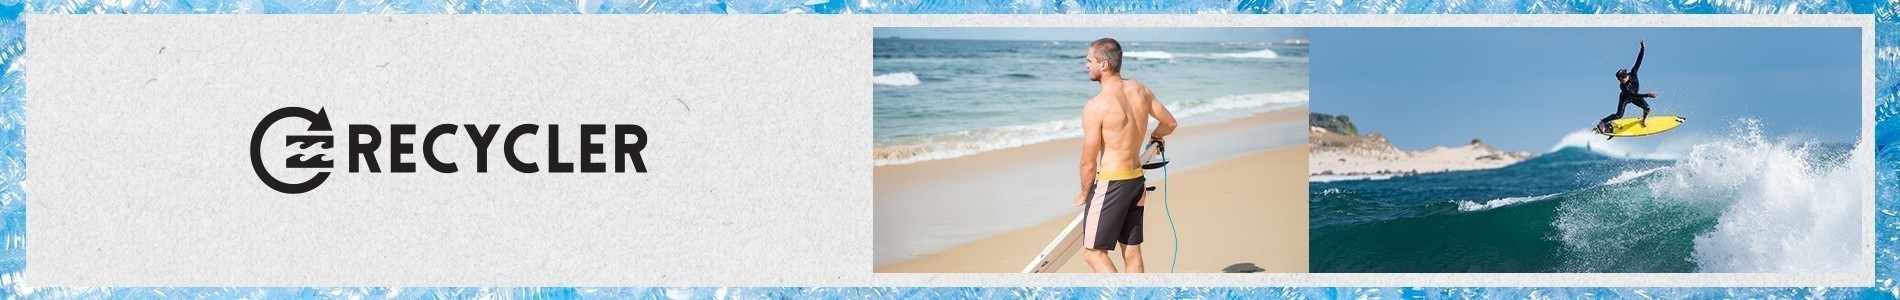 Men's Recycler Apparel and Boardshorts Collection